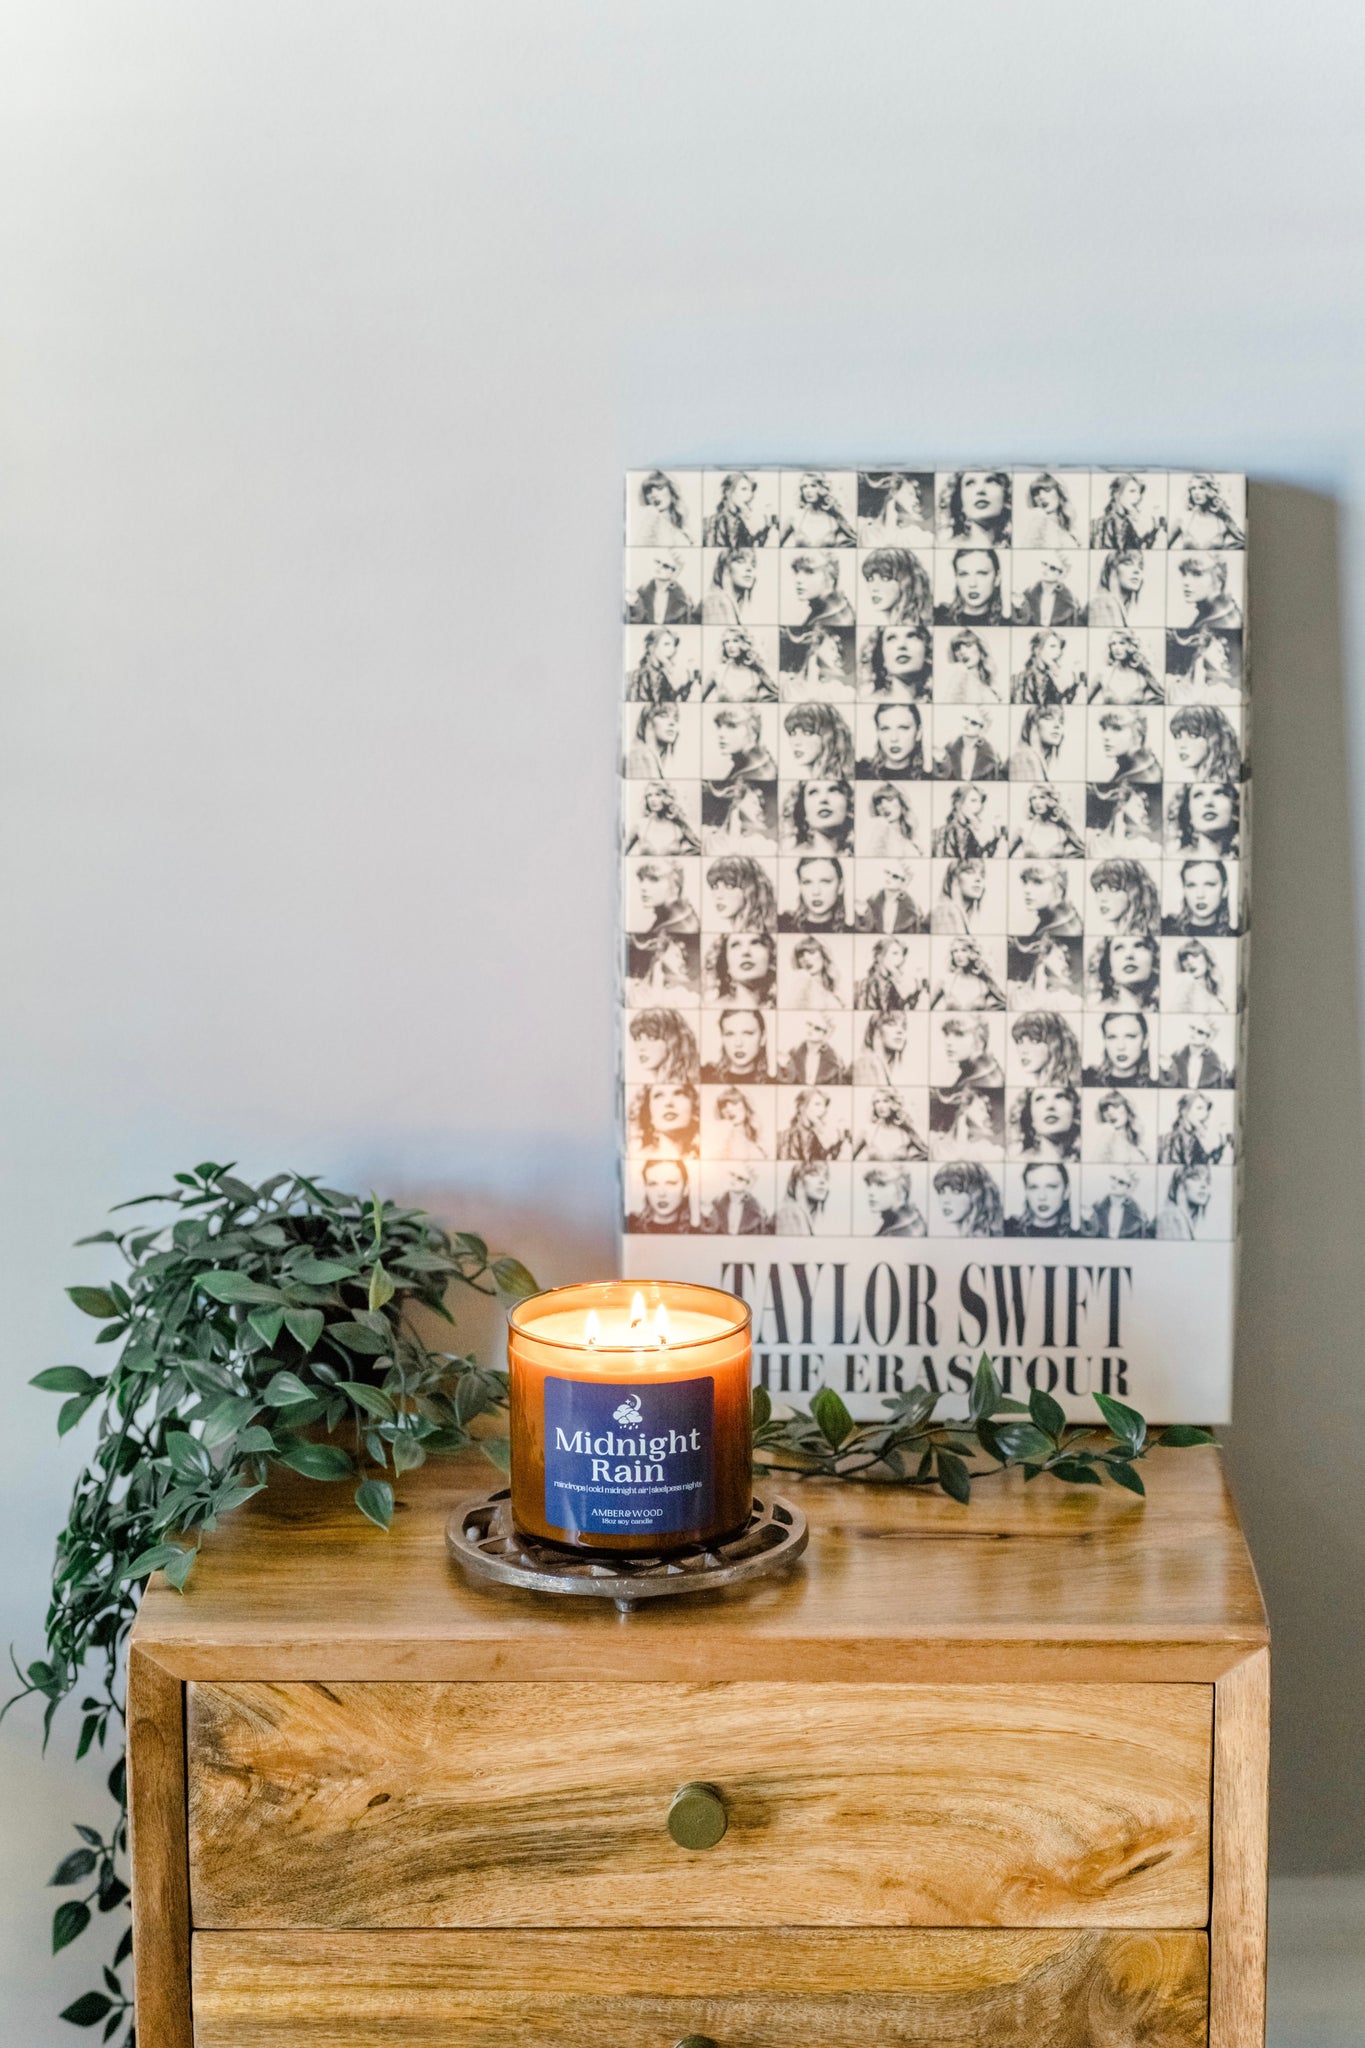 After The Rain Woodwick Candle – Molly & Me Candles